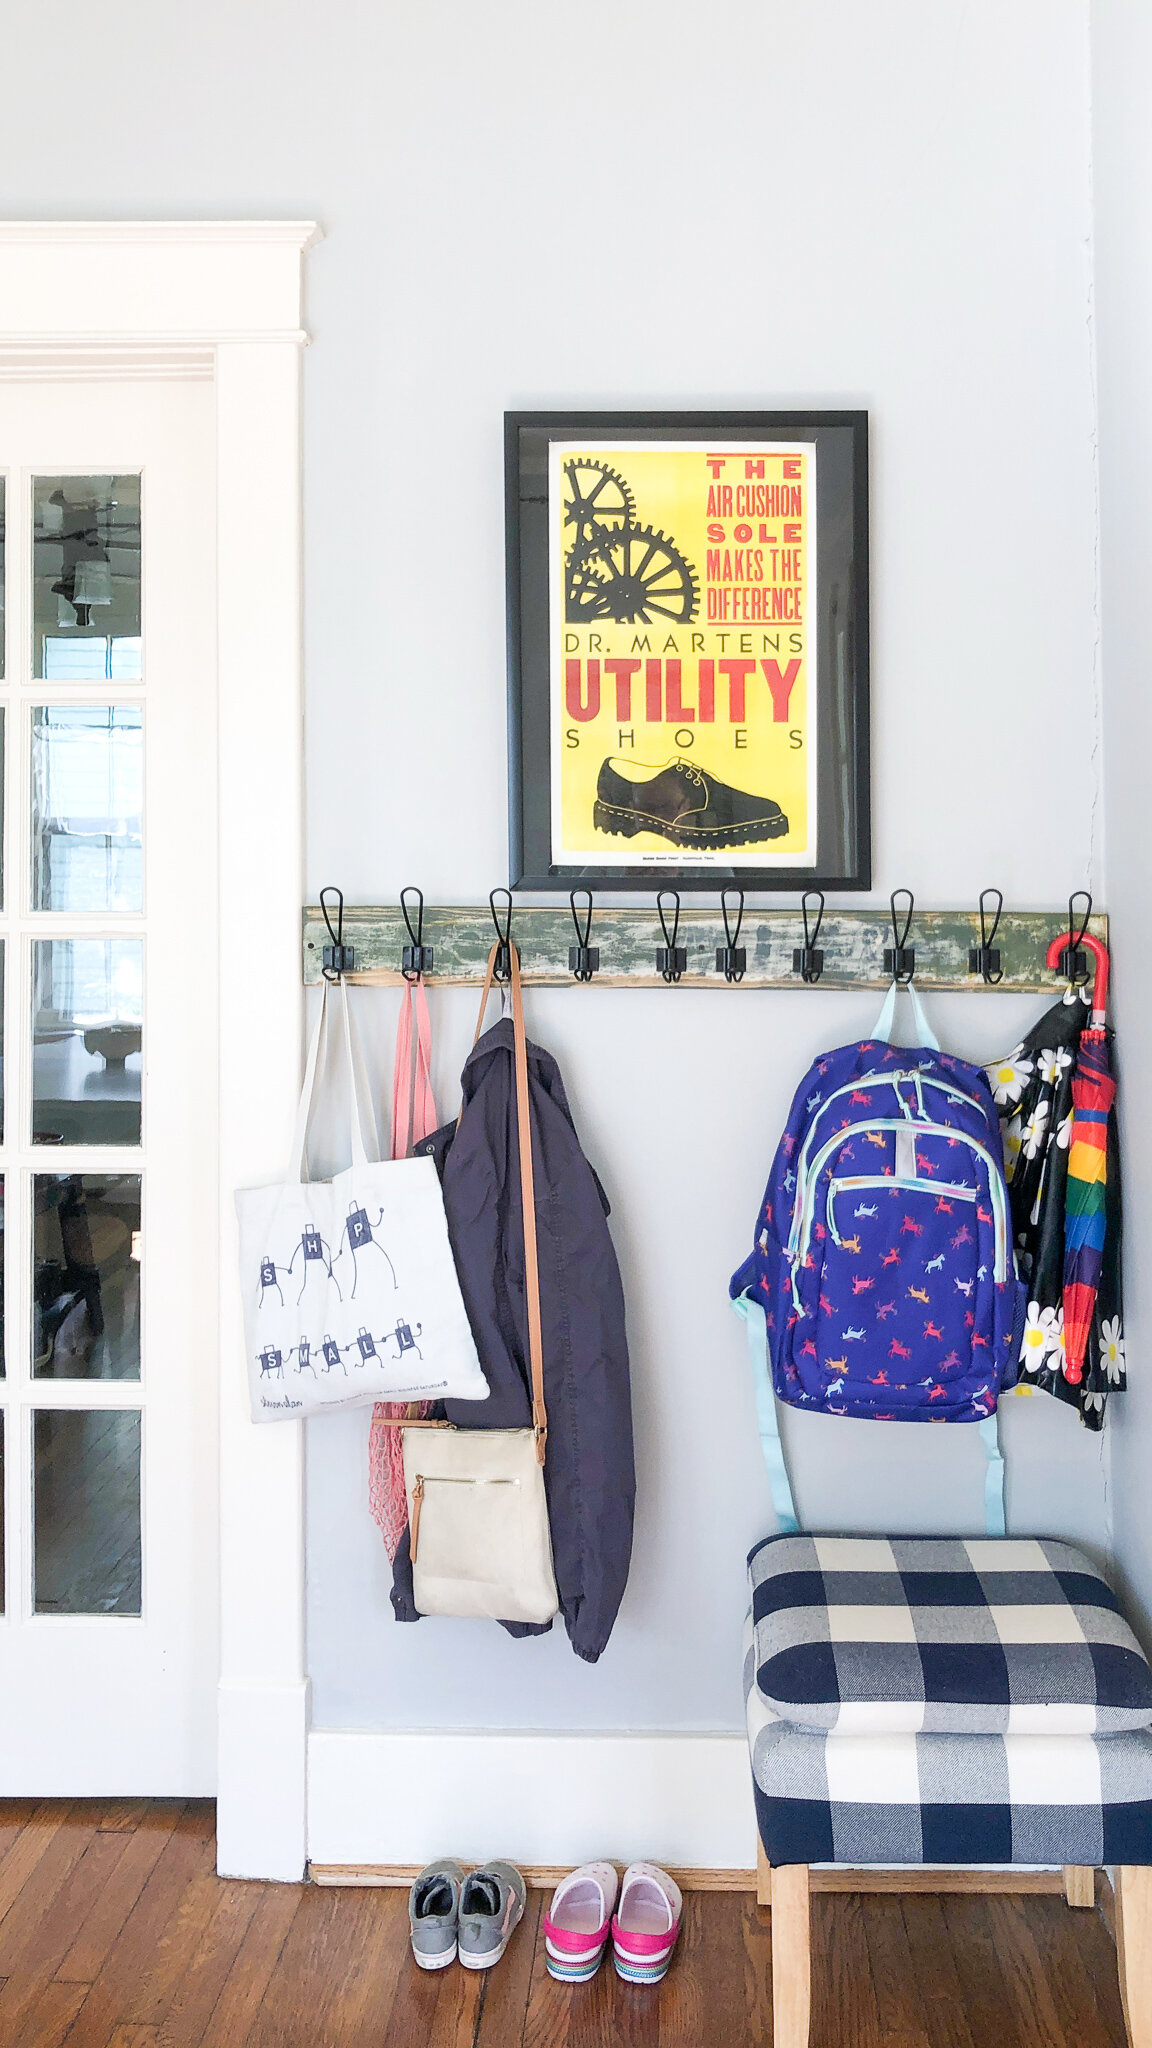 Easy Home Updates for Fall - We added a mini-mudroom by our front door to store our outerwear for the coming chilly weather. #diyhome #mudroom #storageideas #organizationdiy #bungalowstyle #schoolhouseliving